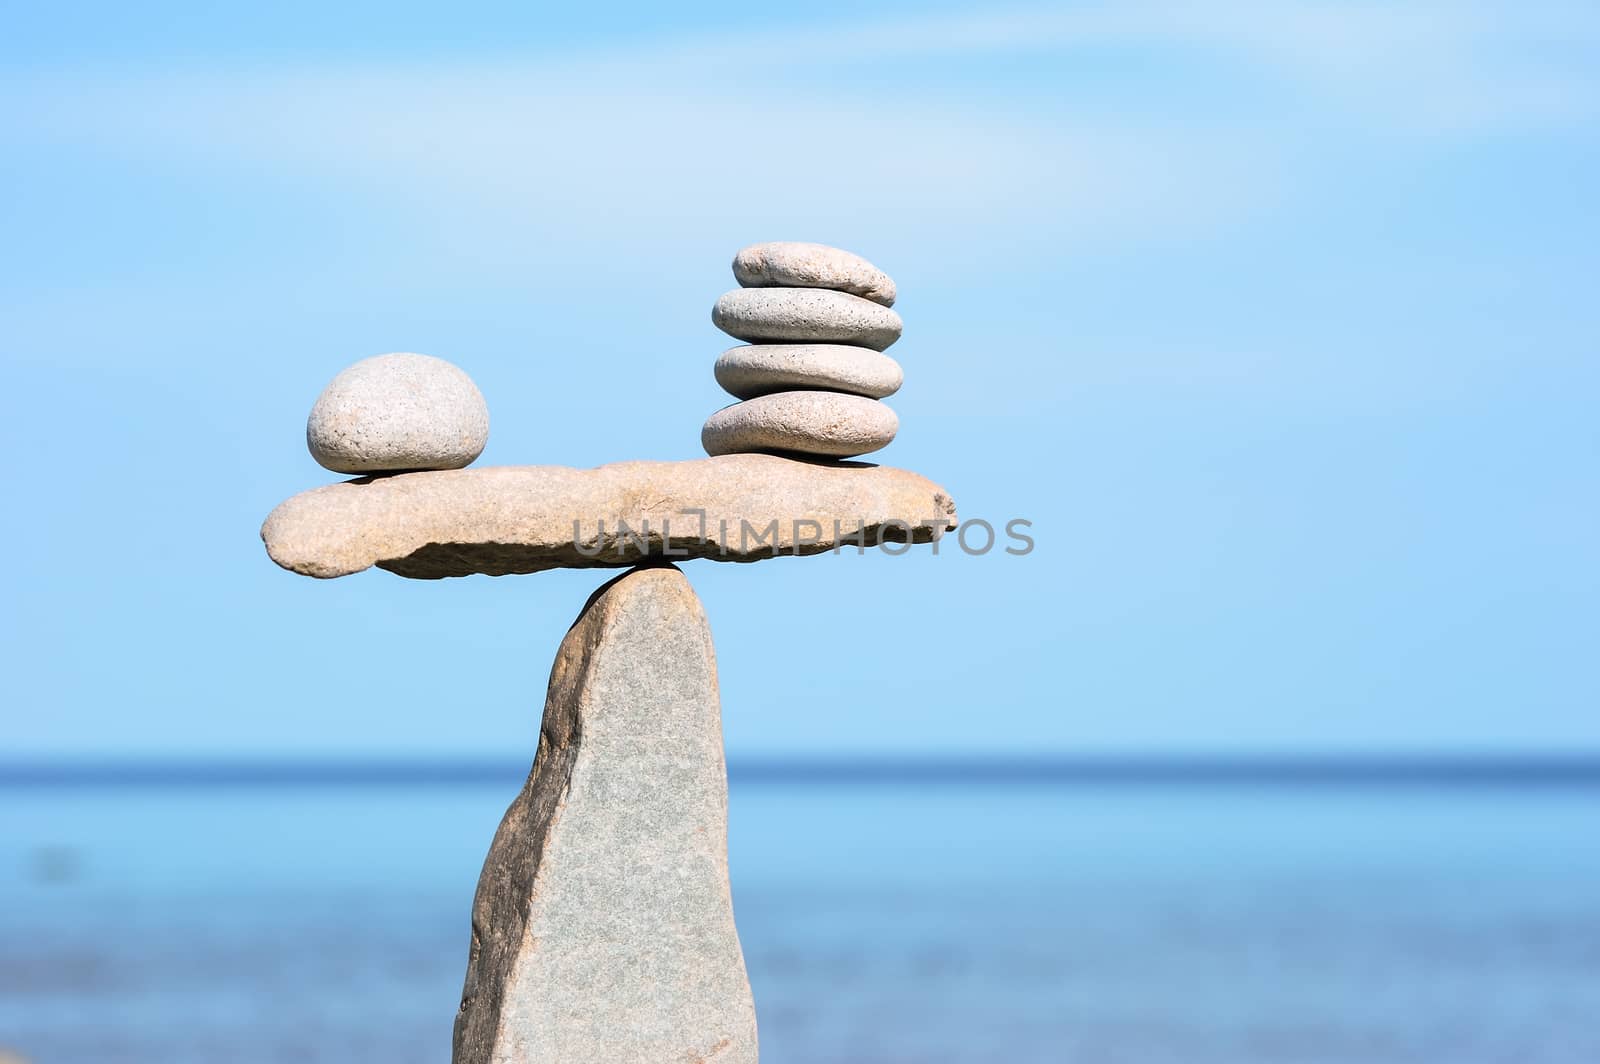 Balance of pebbles on the top of triangle stone